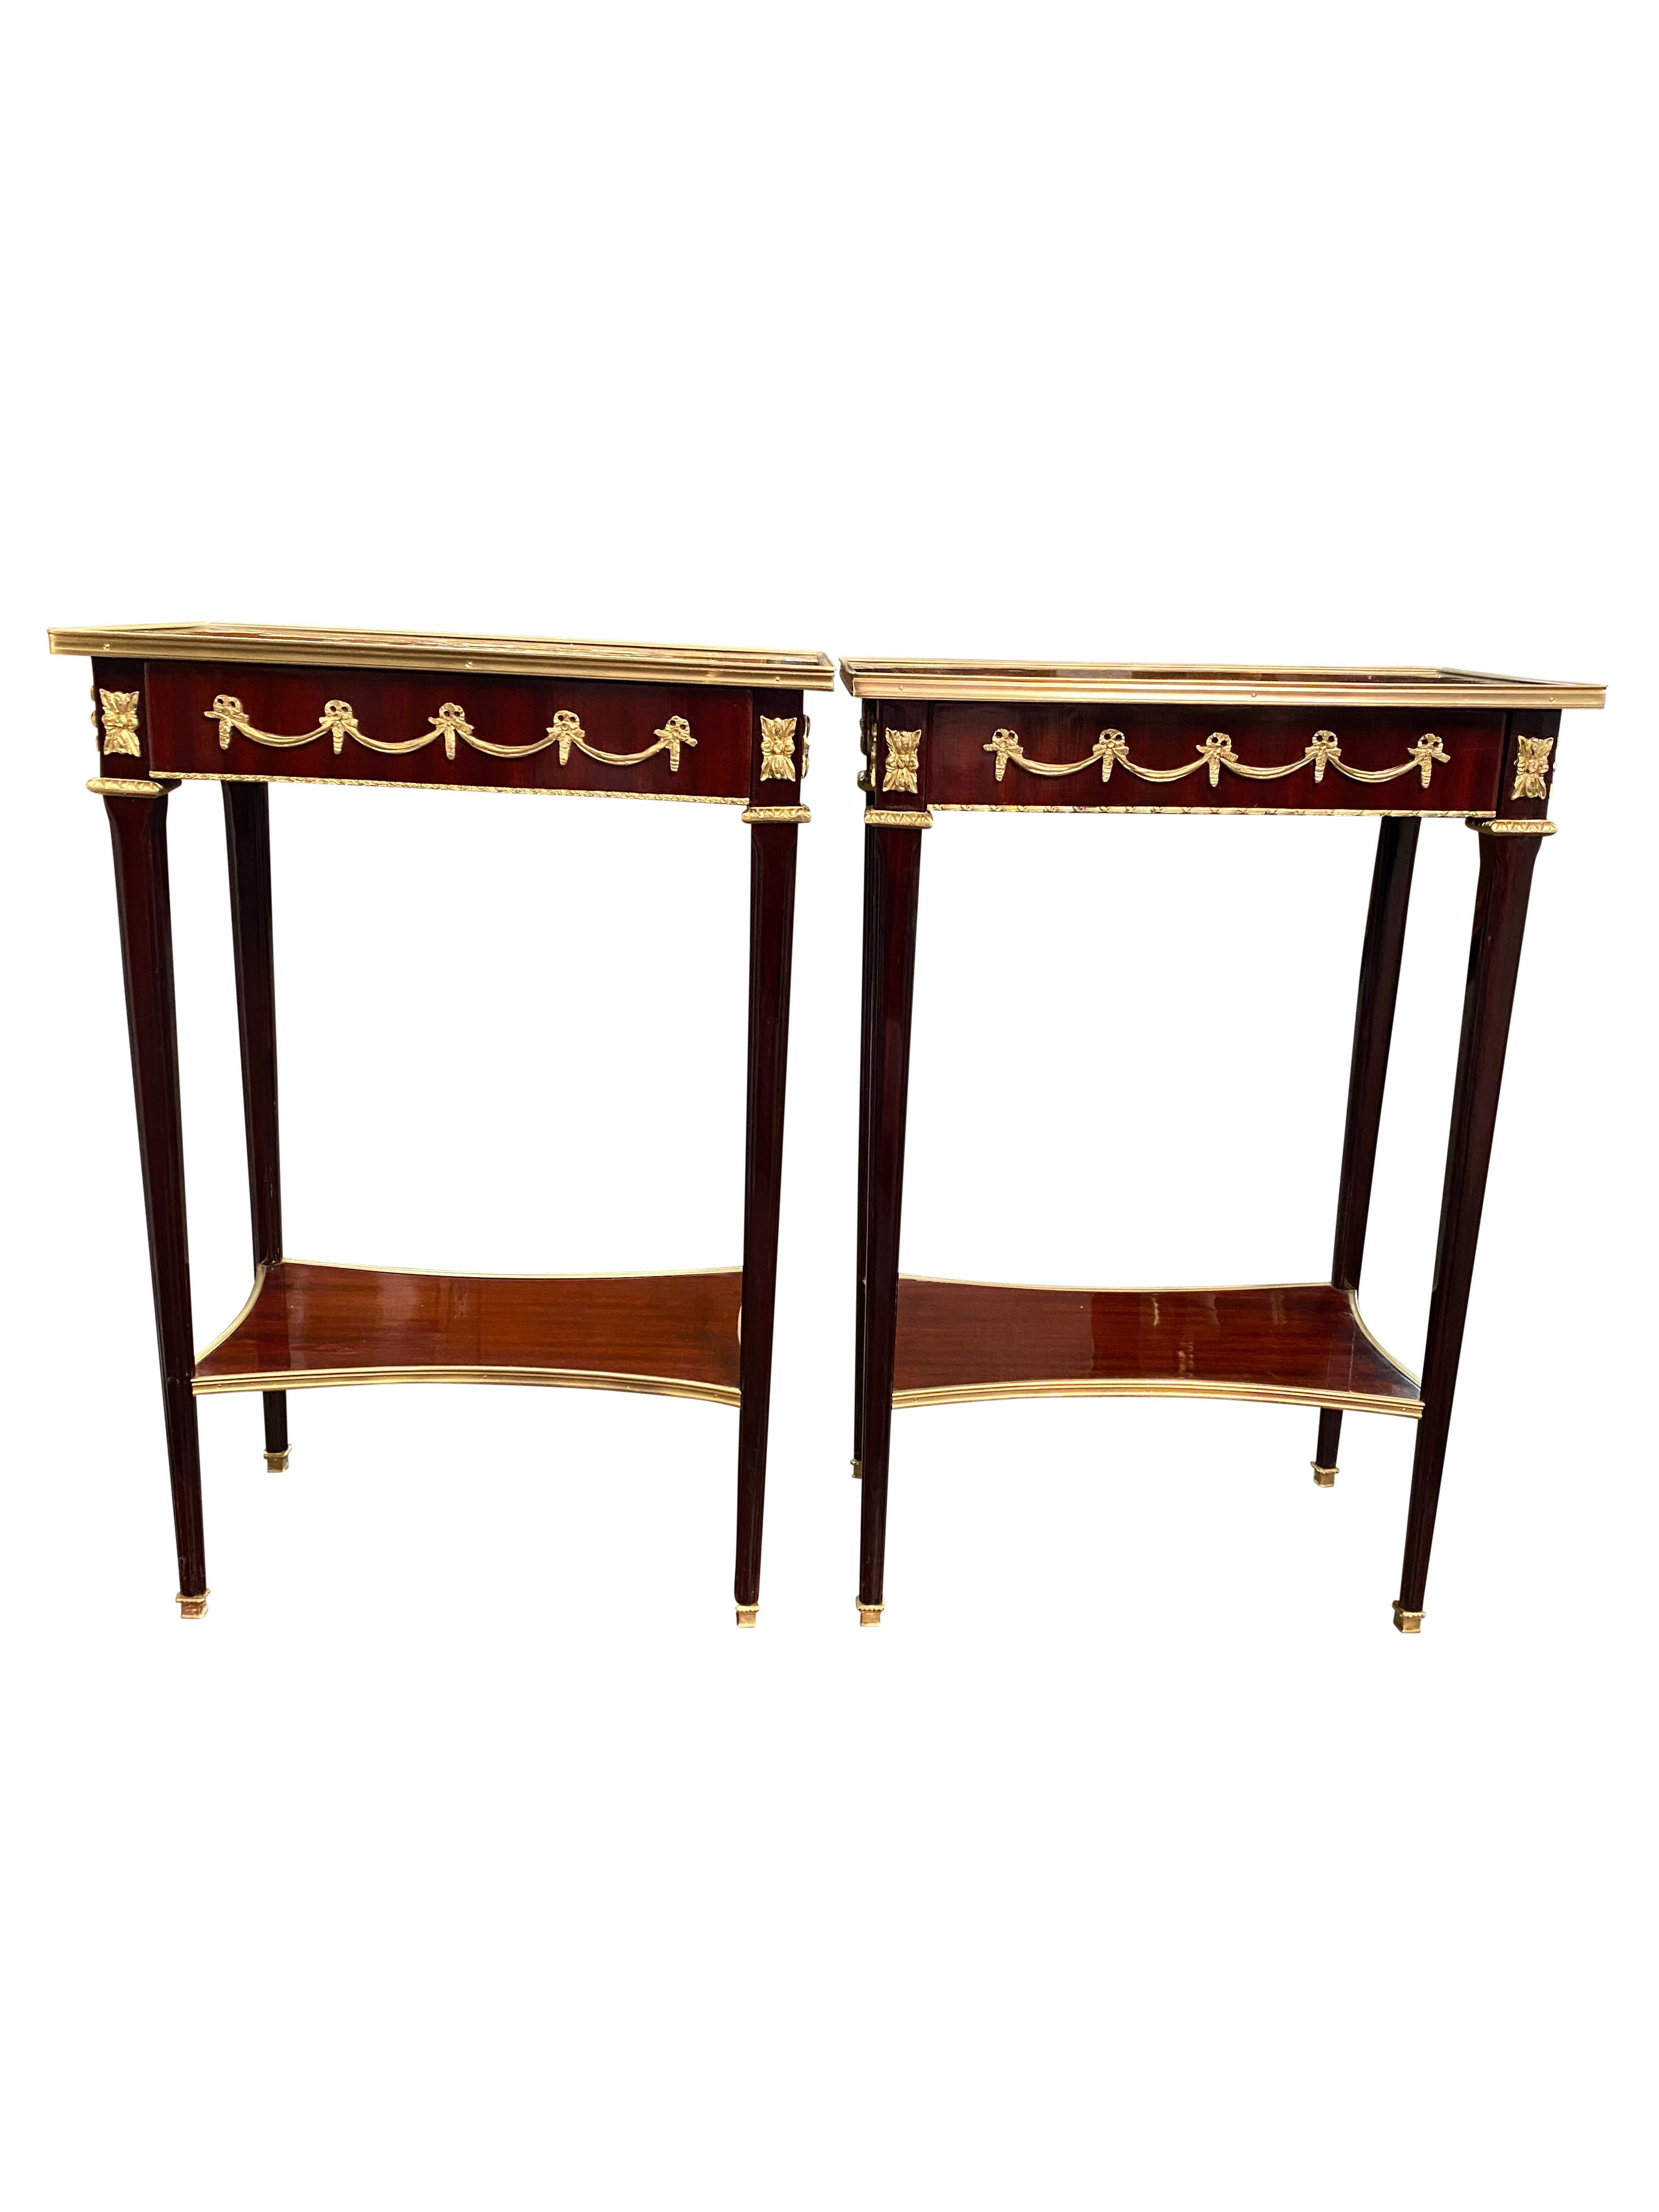 A stunning pair of 20th century Empire style side tables. A gorgeous and elegant design perfect for modern interiors.